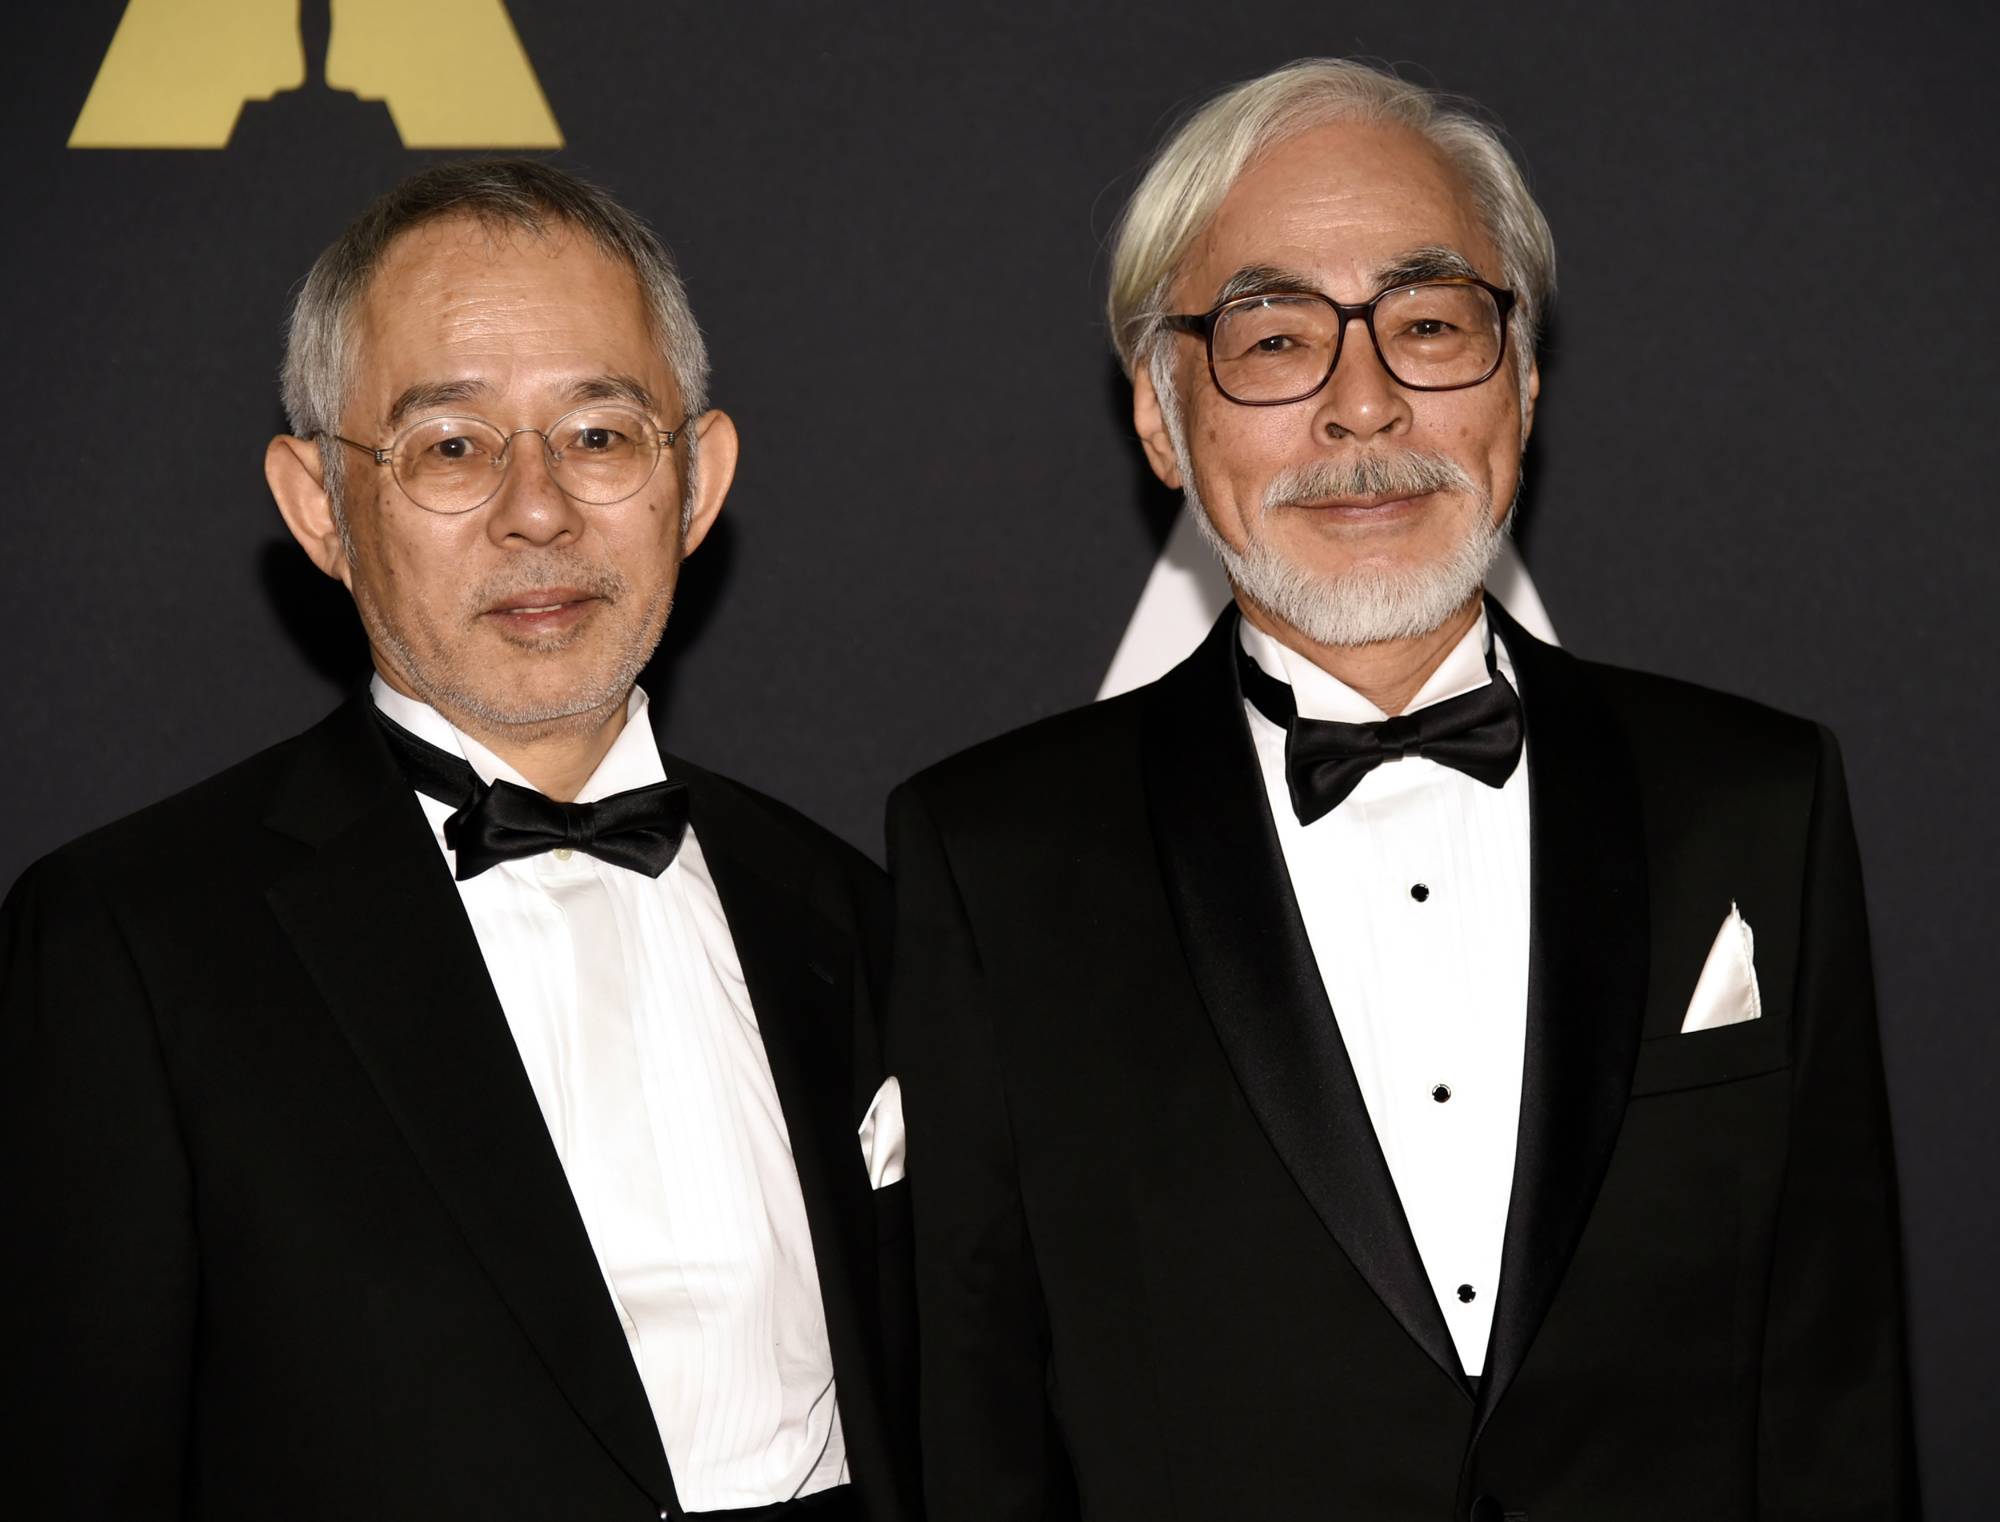 Film producer Toshio Suzuki (left), a long-time colleague of Hayao Miyazaki (right), poses with the animator at an awards ceremony in Los Angeles in 2014. | REUTERS